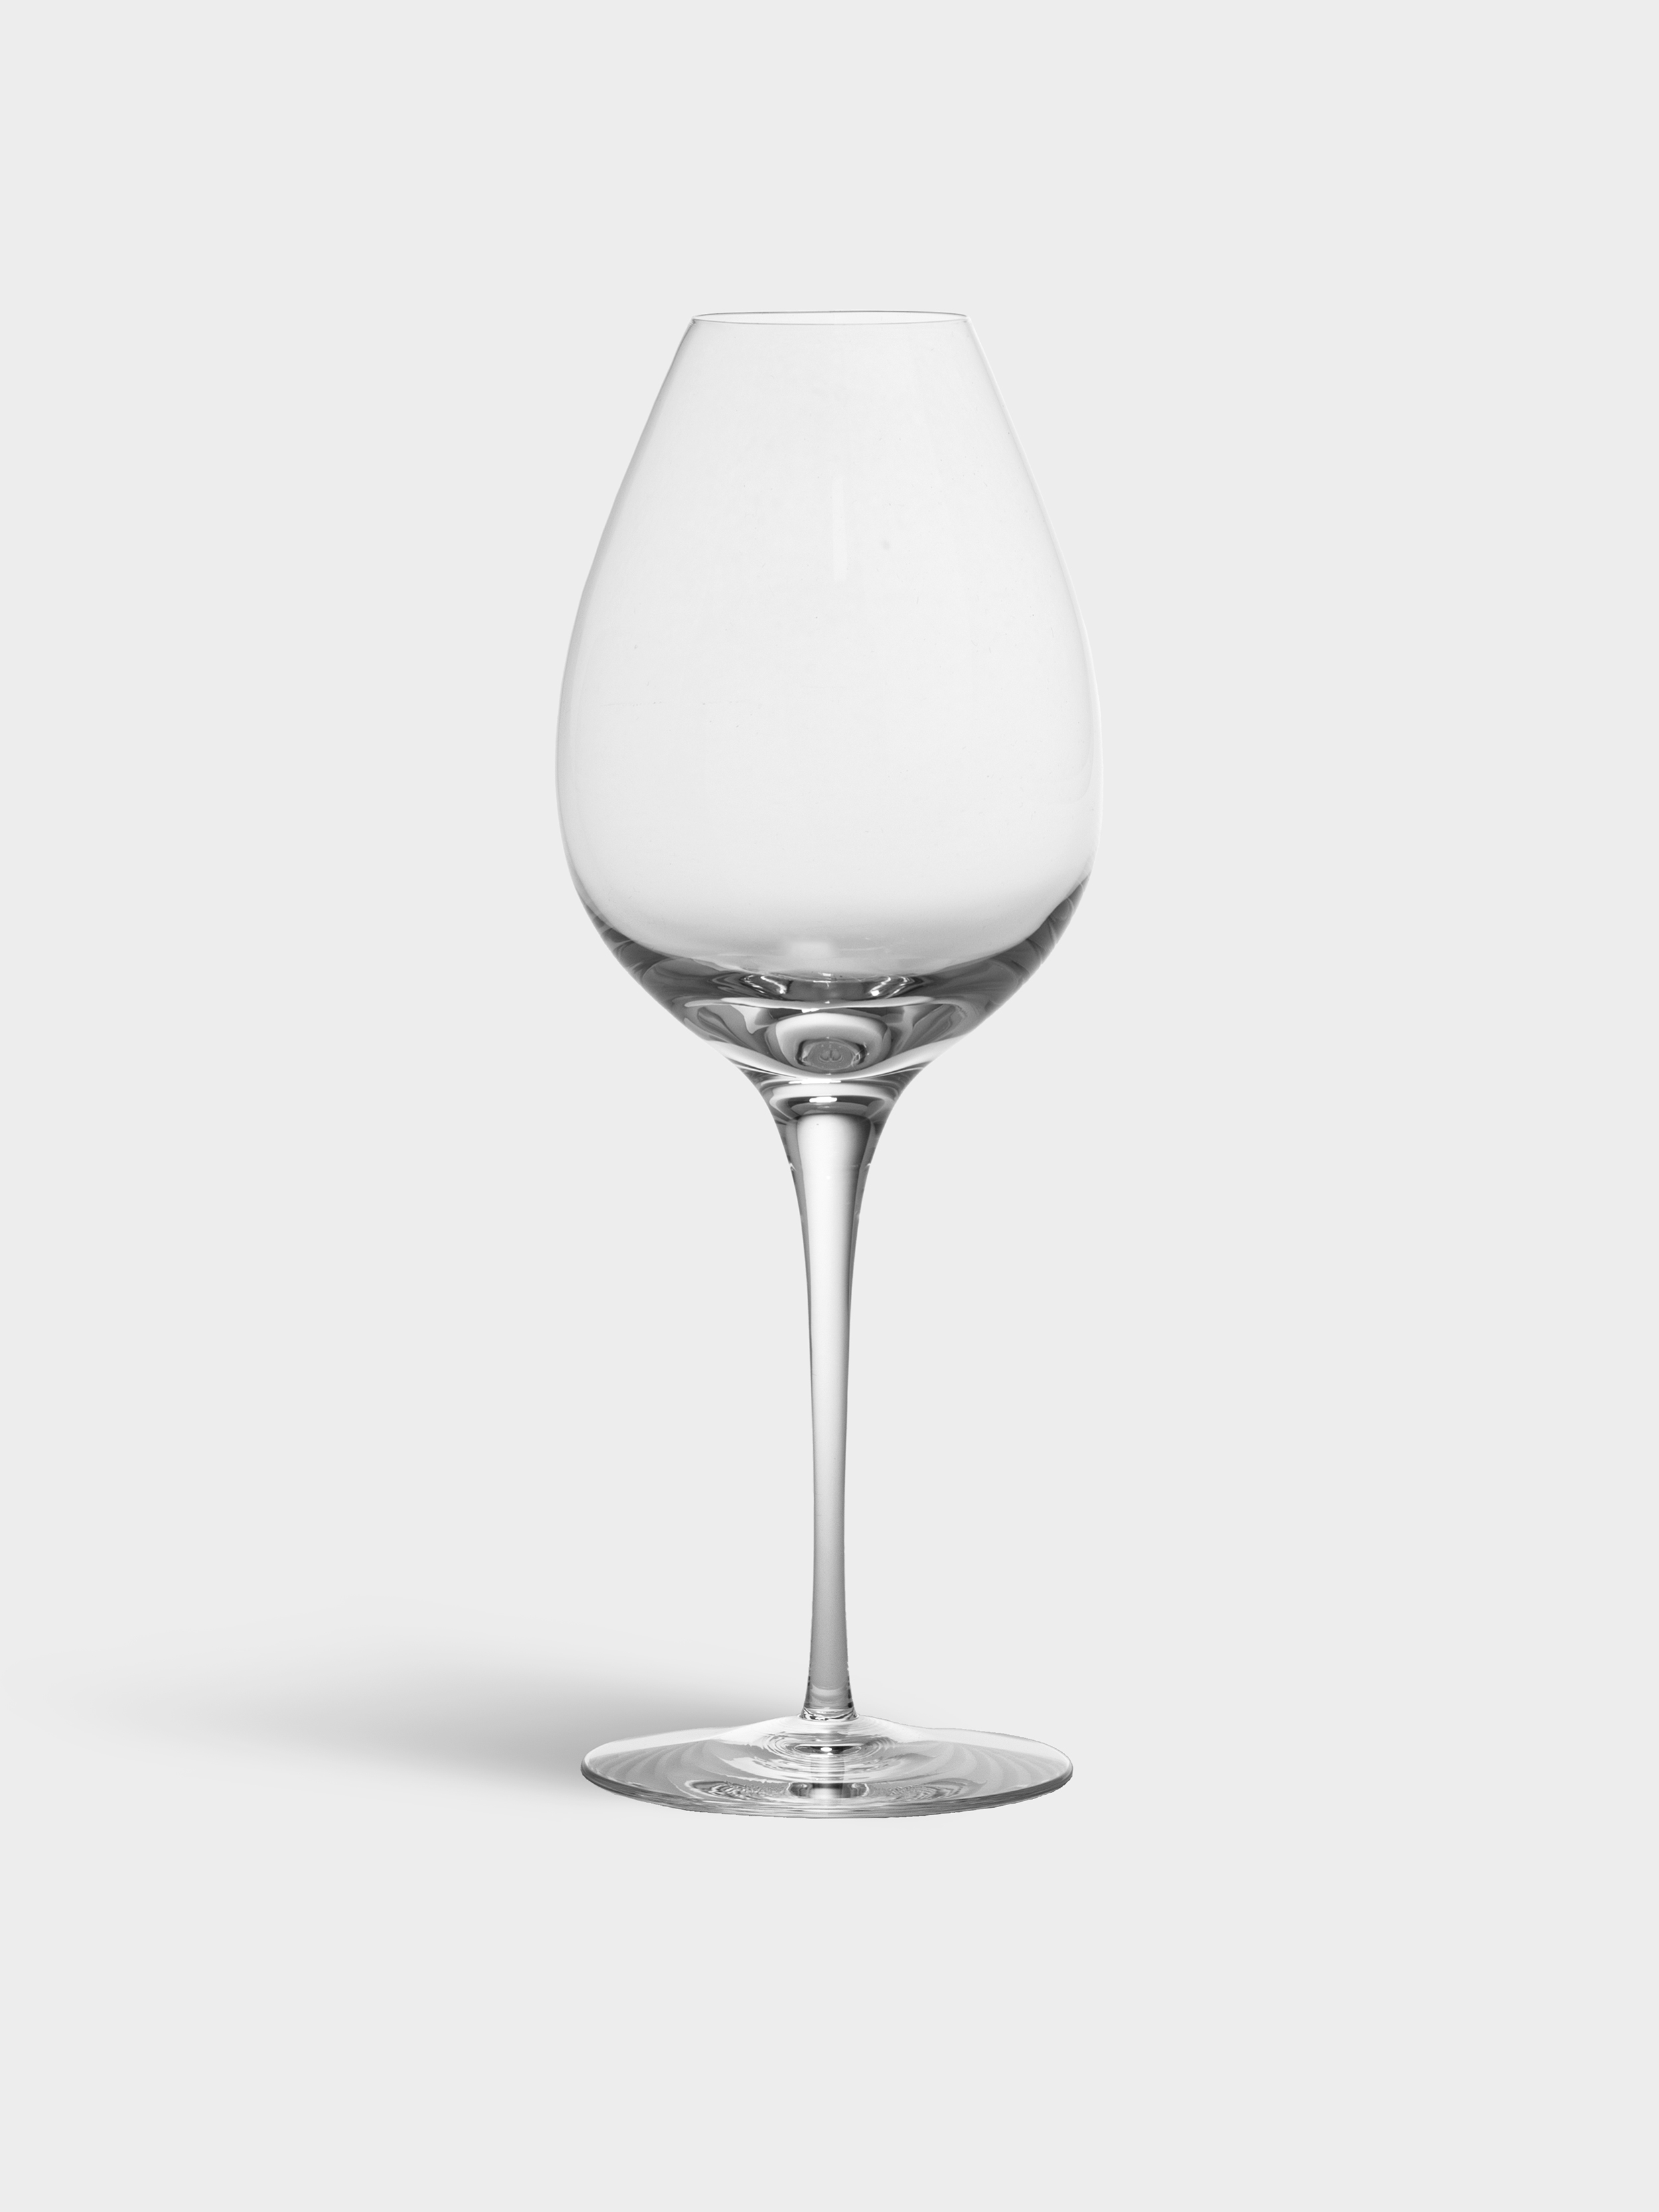 Difference Primeur wine glass | Orrefors